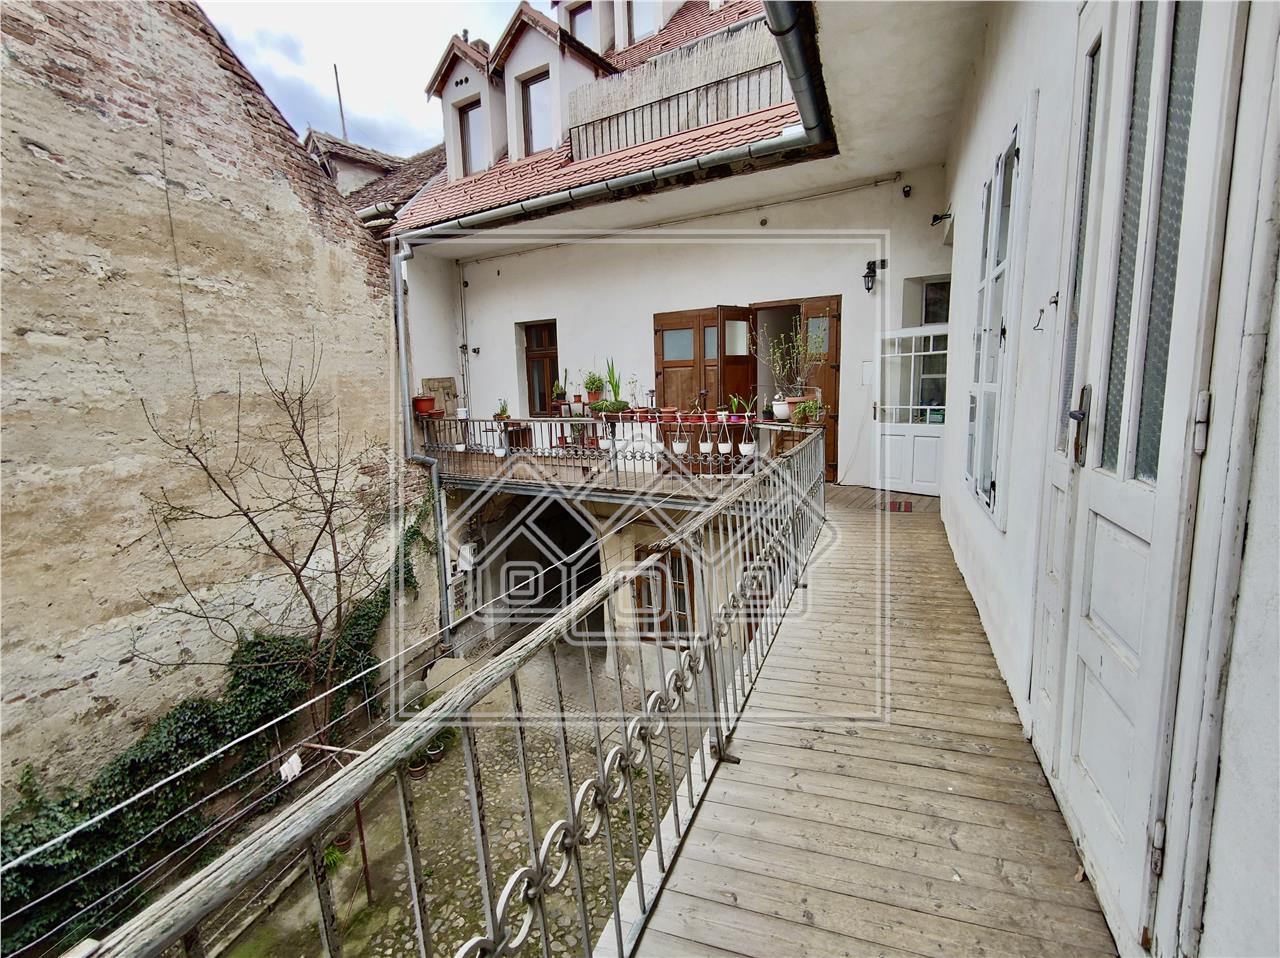 Apartment for sale in Sibiu, 4 rooms - 2nd floor